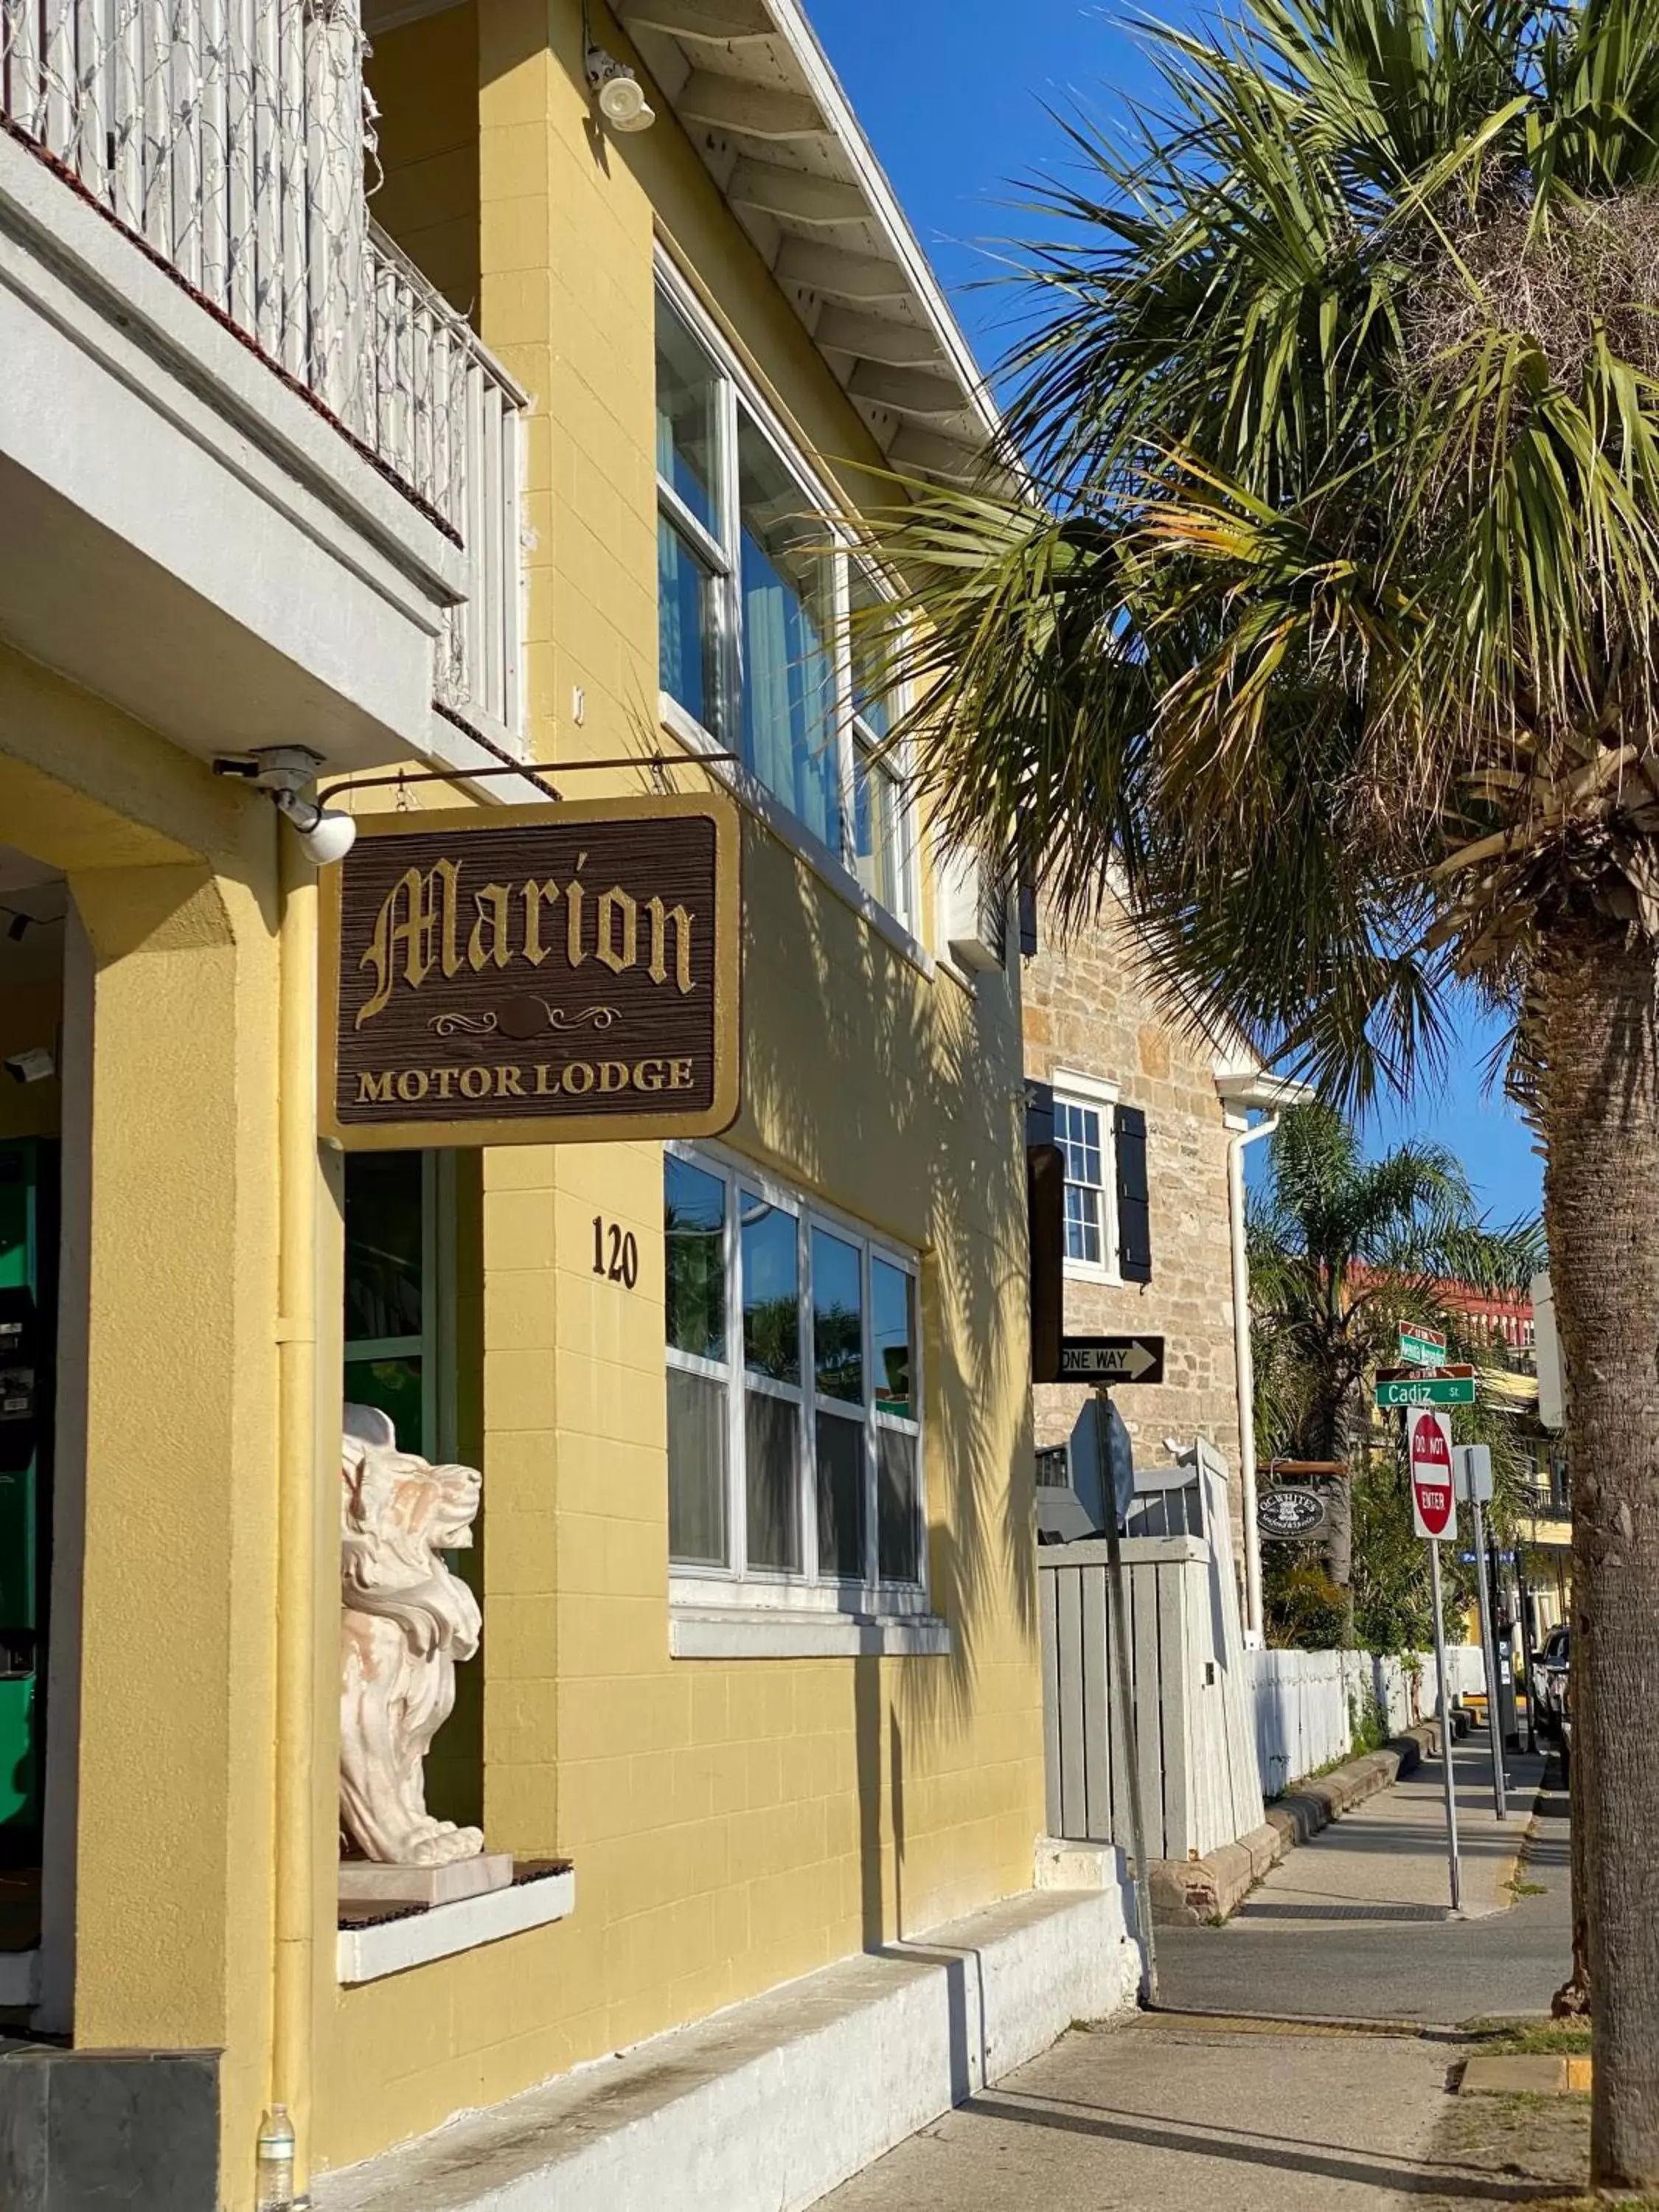 Property building in Historic Waterfront Marion Motor Lodge in downtown St Augustine